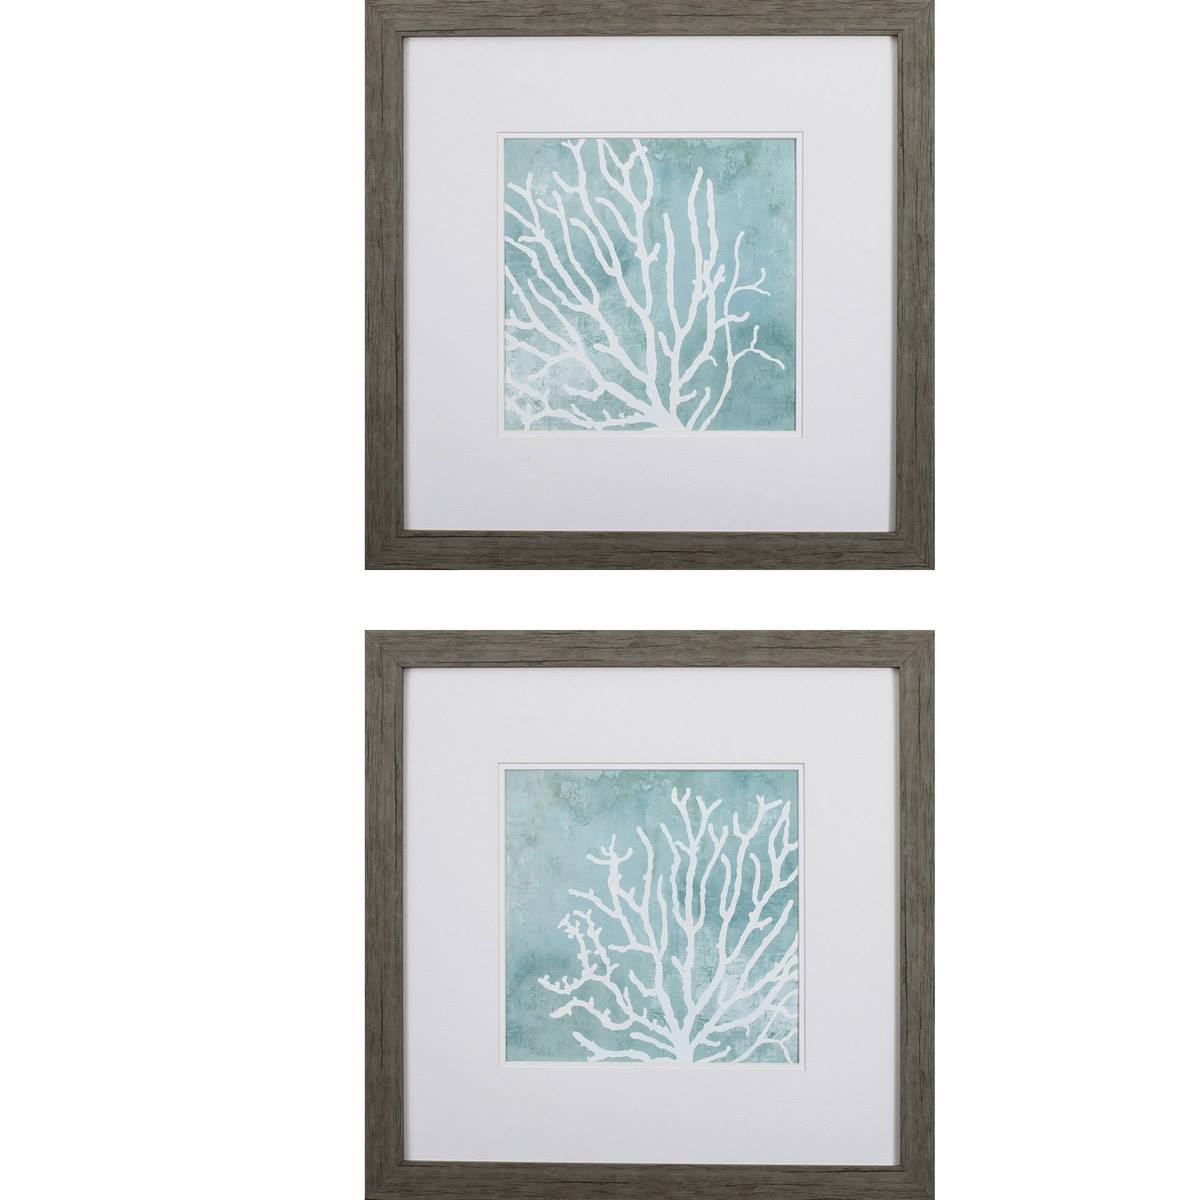 Propac Images(R) 2pc. Sea Crown Wall Art Set